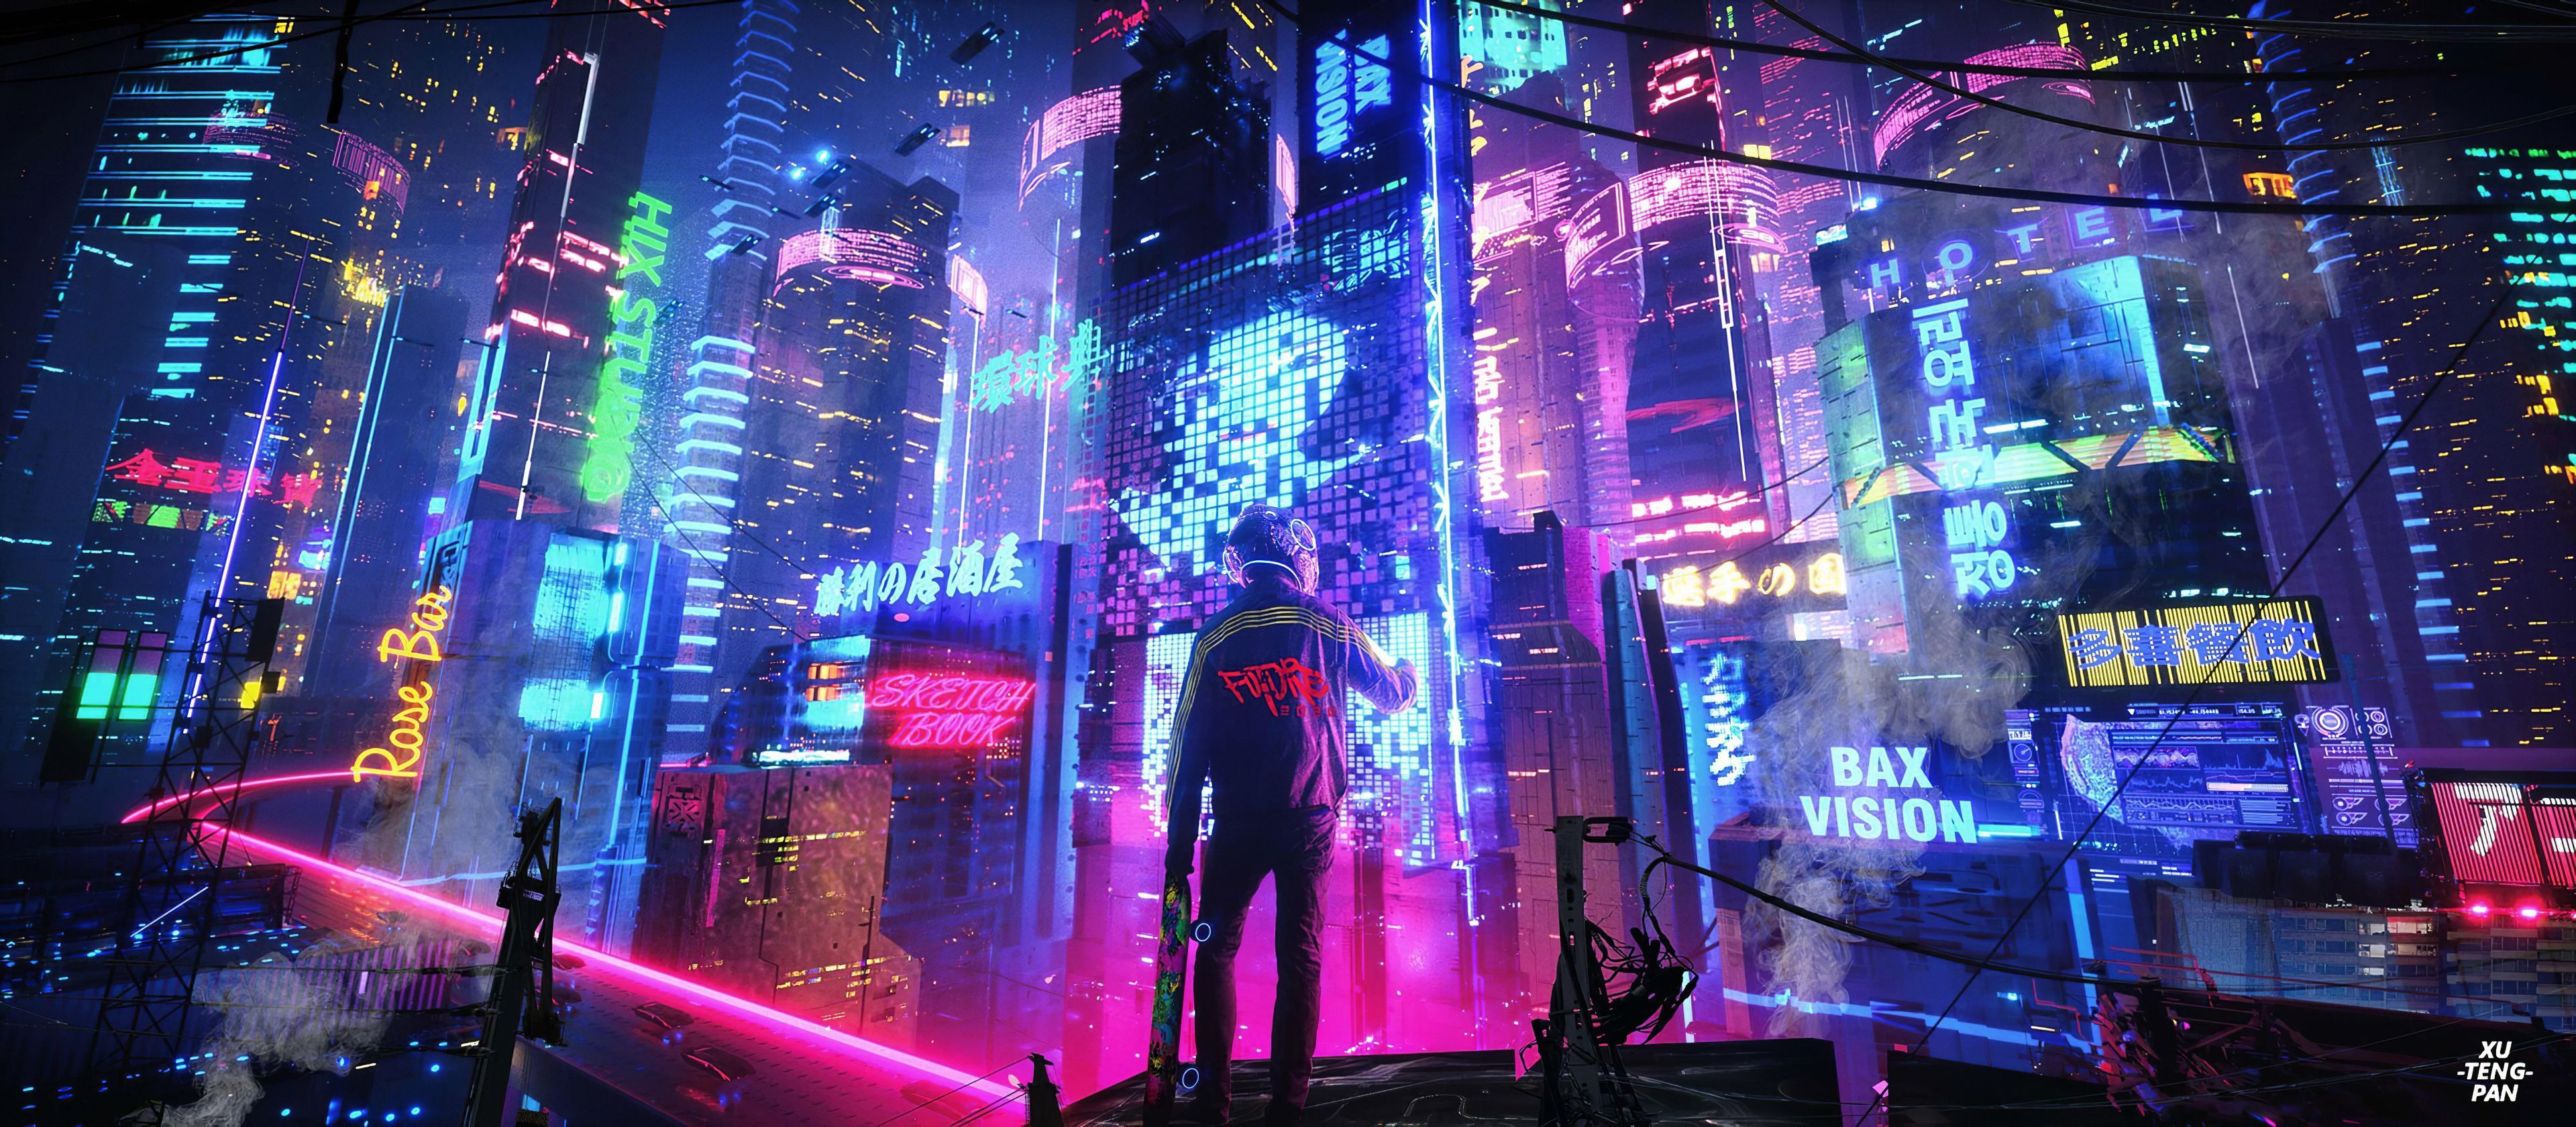 Anime Neon City Wallpaper 4K / Anime Neon City Wallpaper Top Free Anime Neon City Background, Tons of awesome ultra HD neon anime wallpaper to download for free